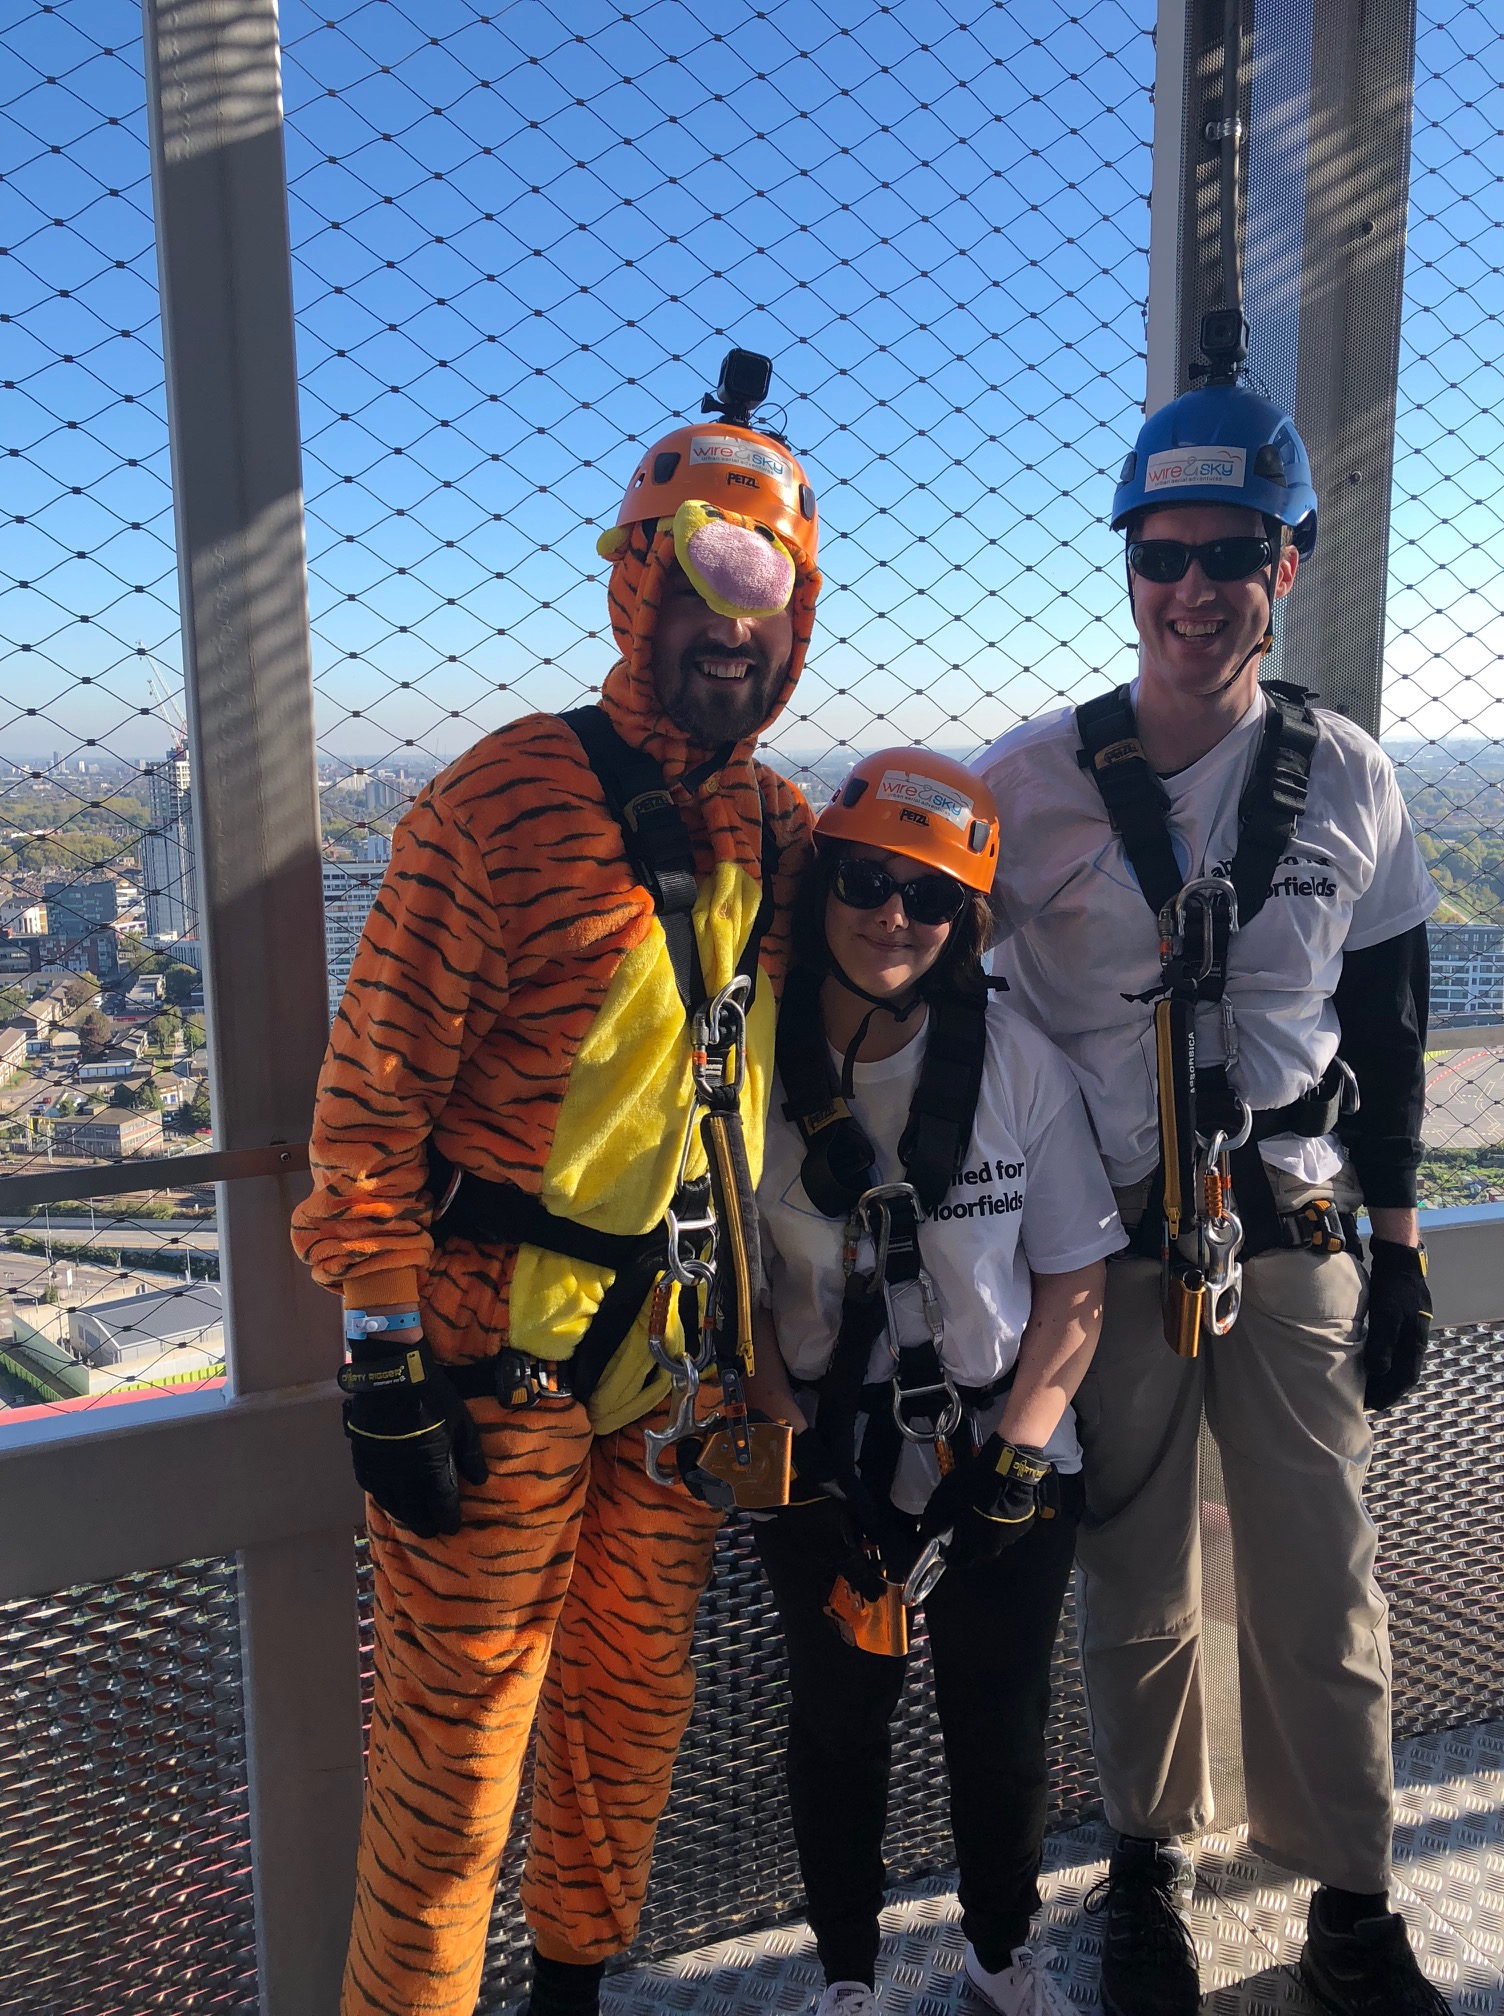 Matt, Claire and Glen ready to abseil in their harnesses and helmets. Matt and Glen also have GoPro cameras attached to their helmets. Glen and Claire are wearing their Moorfields Eye Charity t-shirts and normal trousers, but Matt is wearing an orange furry Tigger bodysuit, to look like the character from the Winnie The Pooh stories. It has black tiger stripes, a yellow chest, and a big round grey nose poking out from under his helmet.